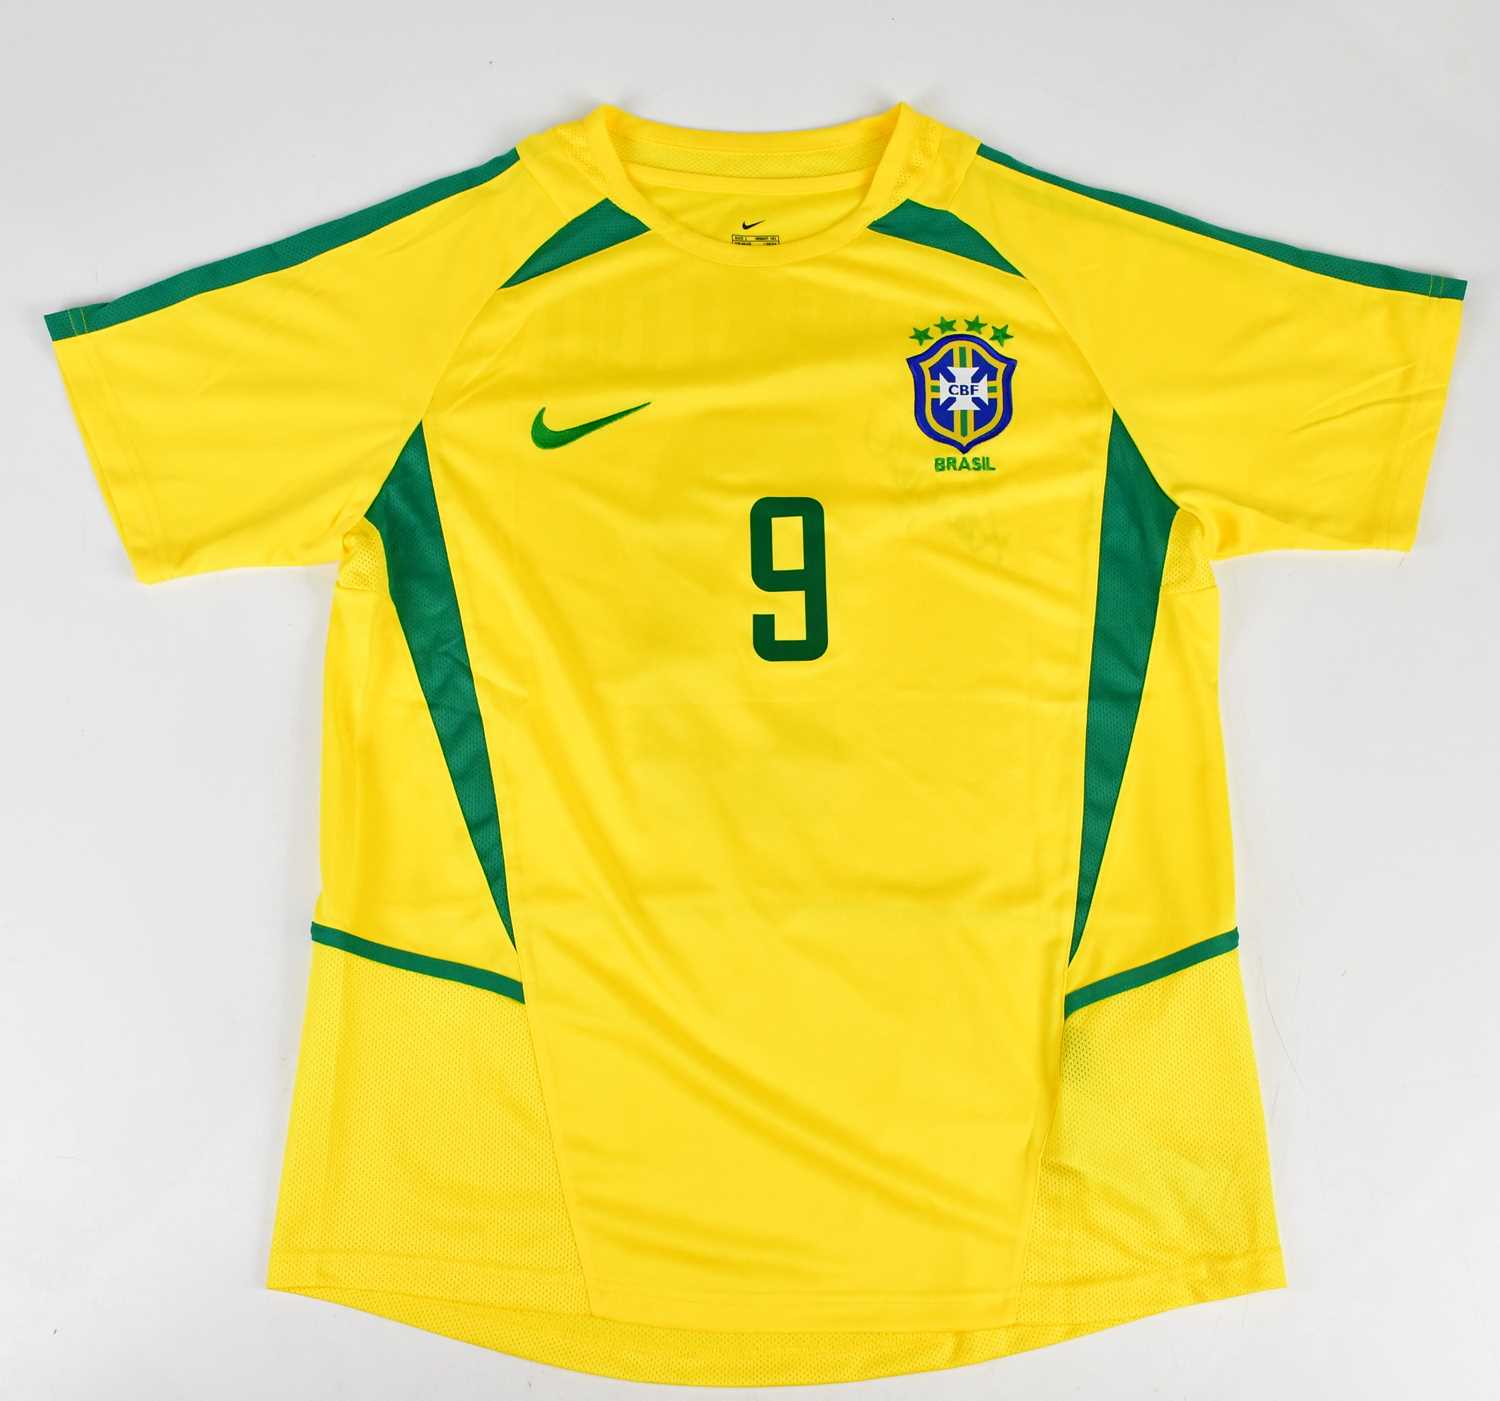 RONALDO (R9); a signed 2002 retro style Brazil football shirt, signed to the reverse, size L.